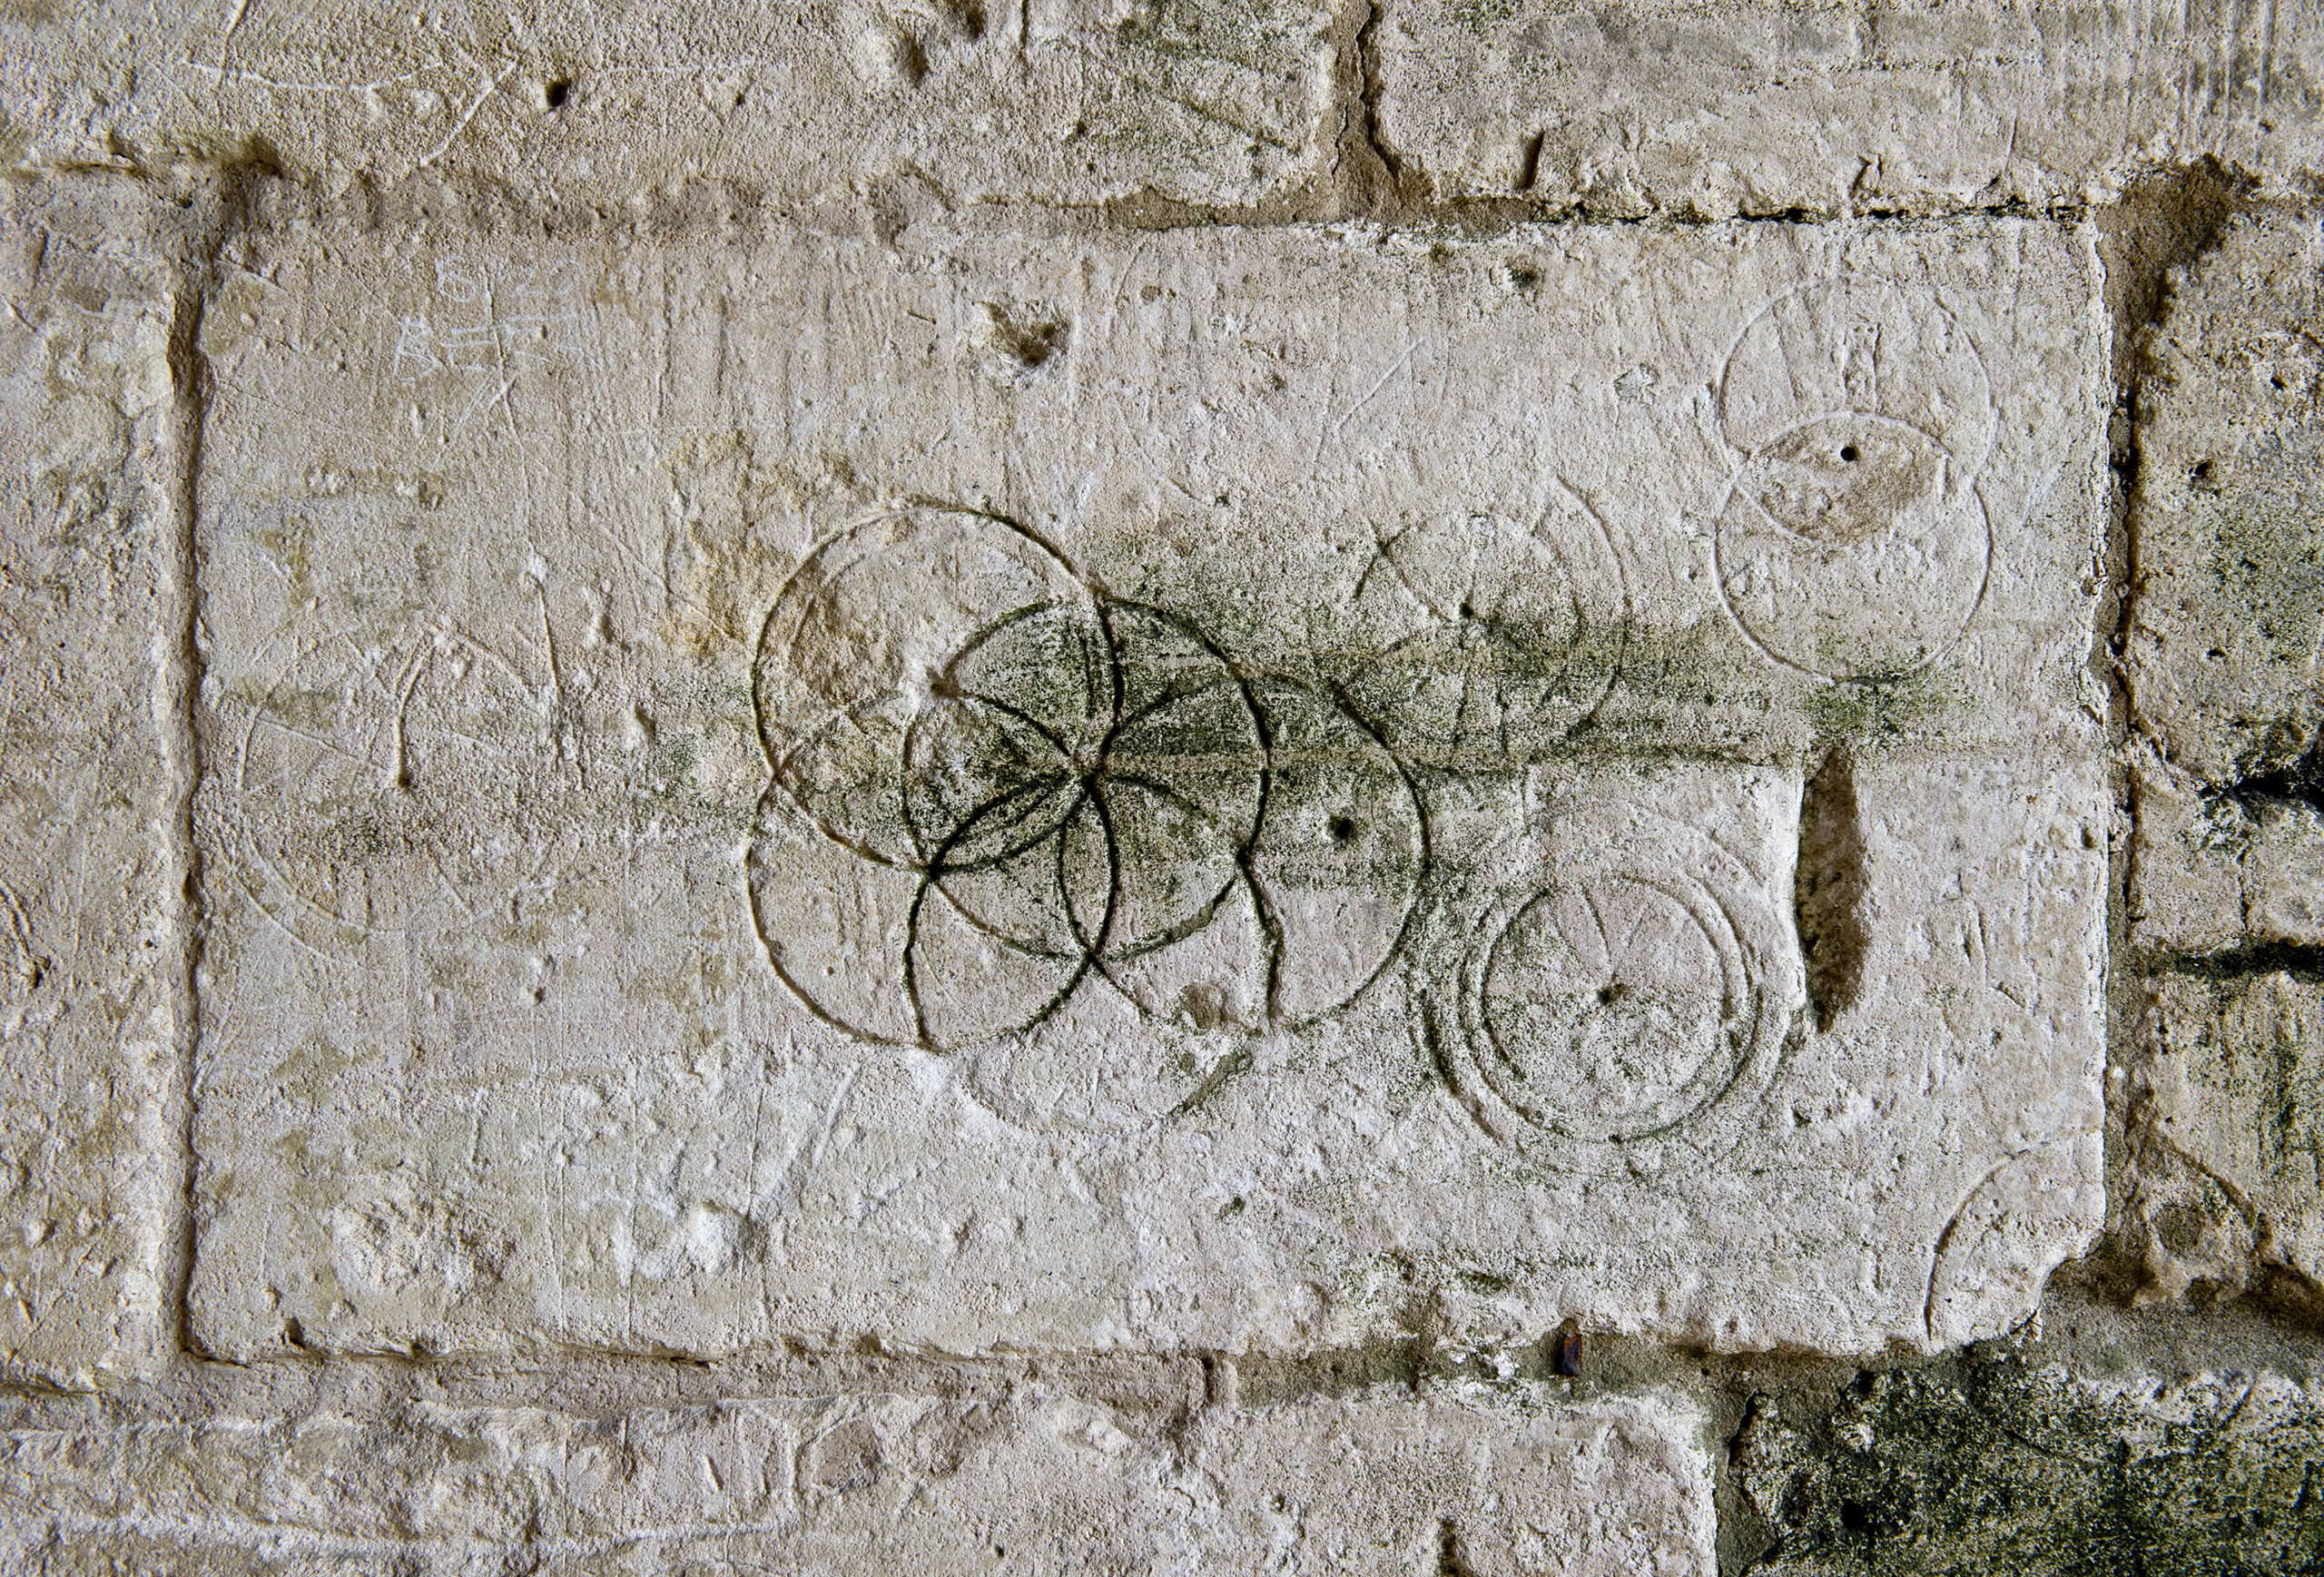 Daisy-Wheels inscribed with a pair of compasses or dividers found in Saxon Tithe barn, Bradford-on-Avon. (Peter Williams—The Historic England Archive, Hi)